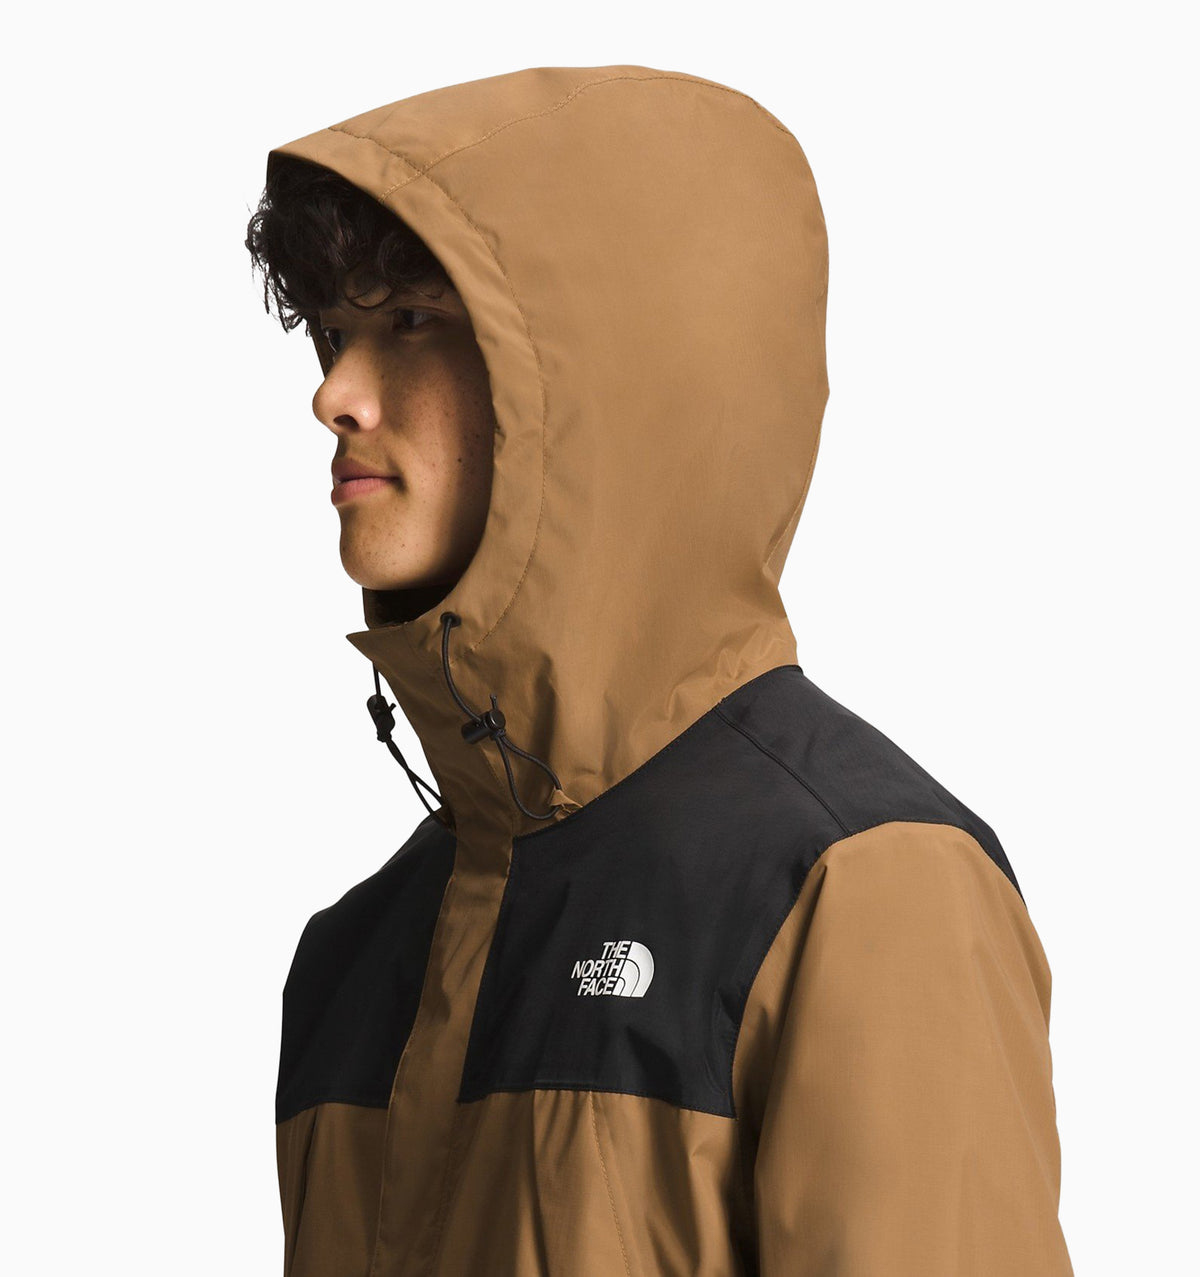 The North Face Men's Antora Jacket - Utility  Brown